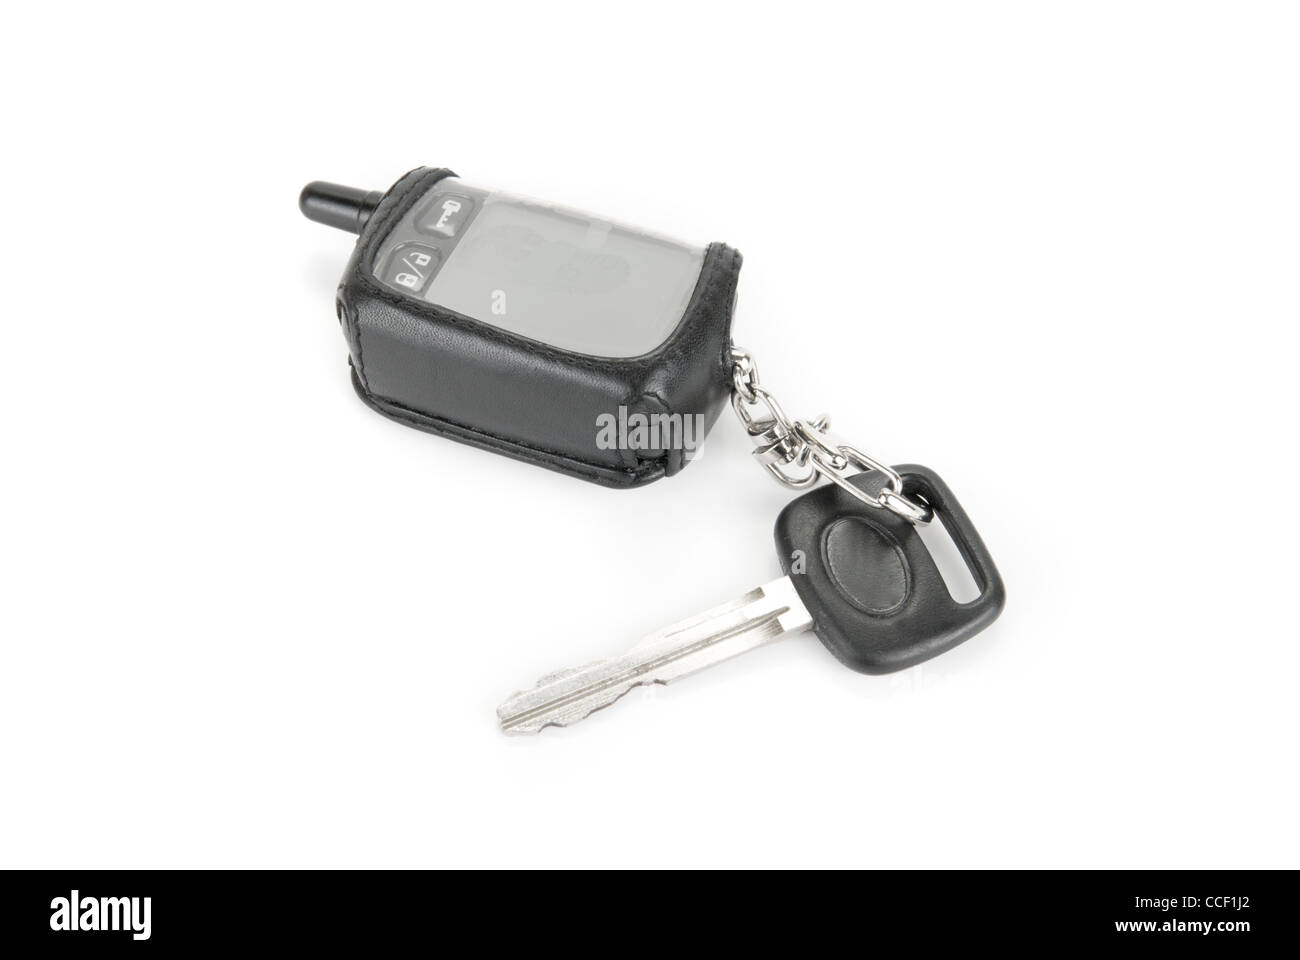 Car key and security system isolated on a white background Stock Photo